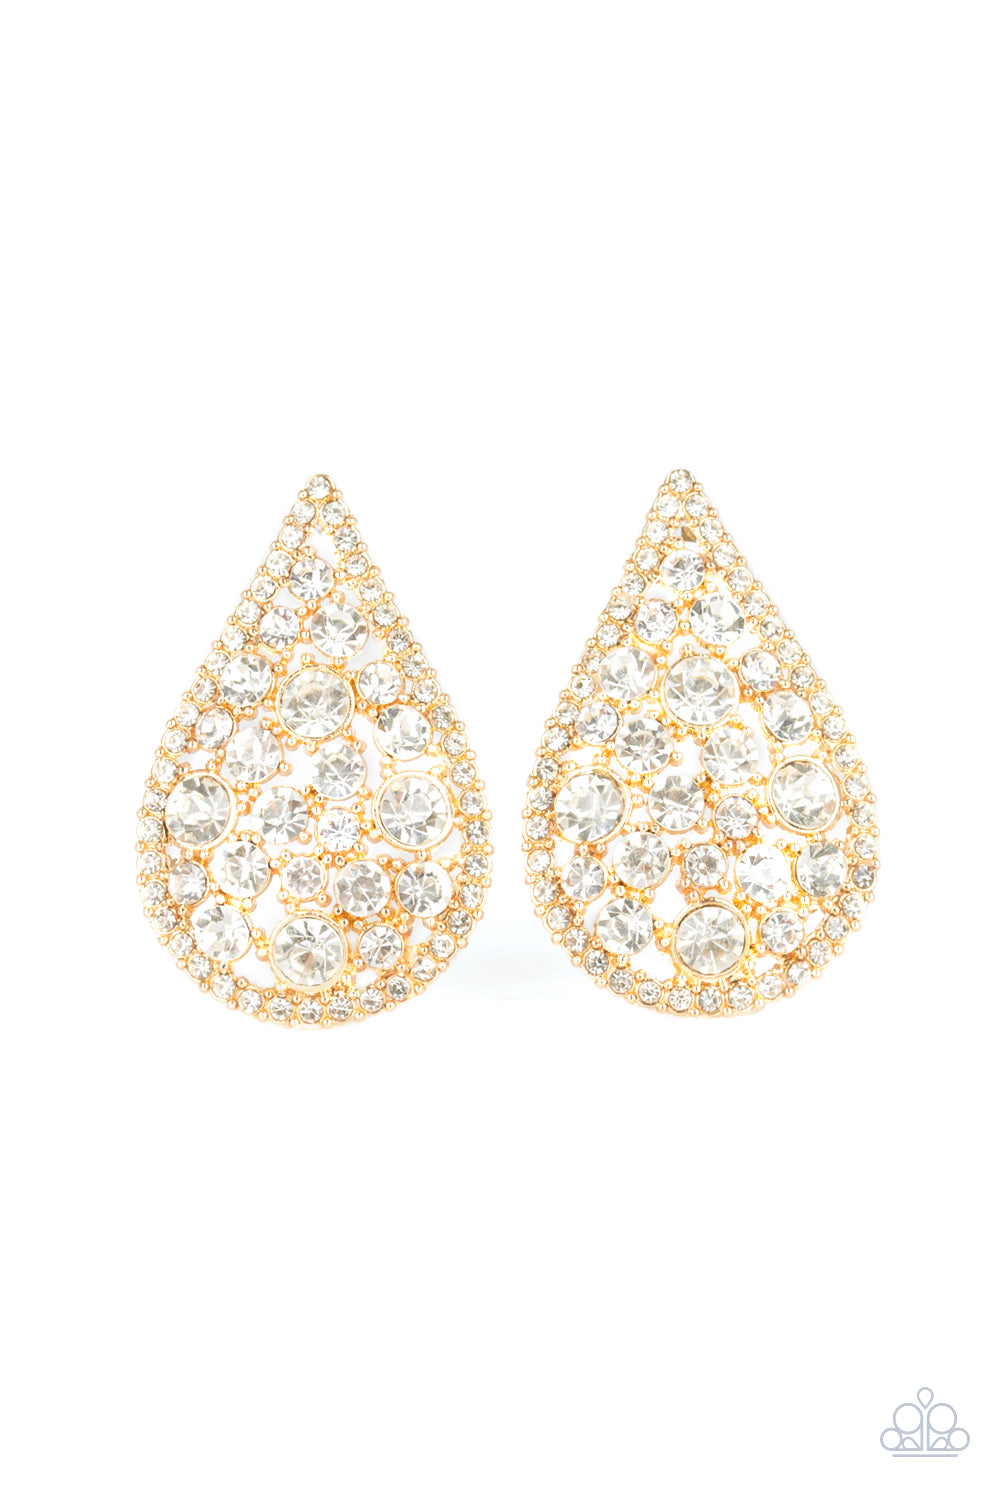 REIGN-Storm - Gold Paparazzi Earrings